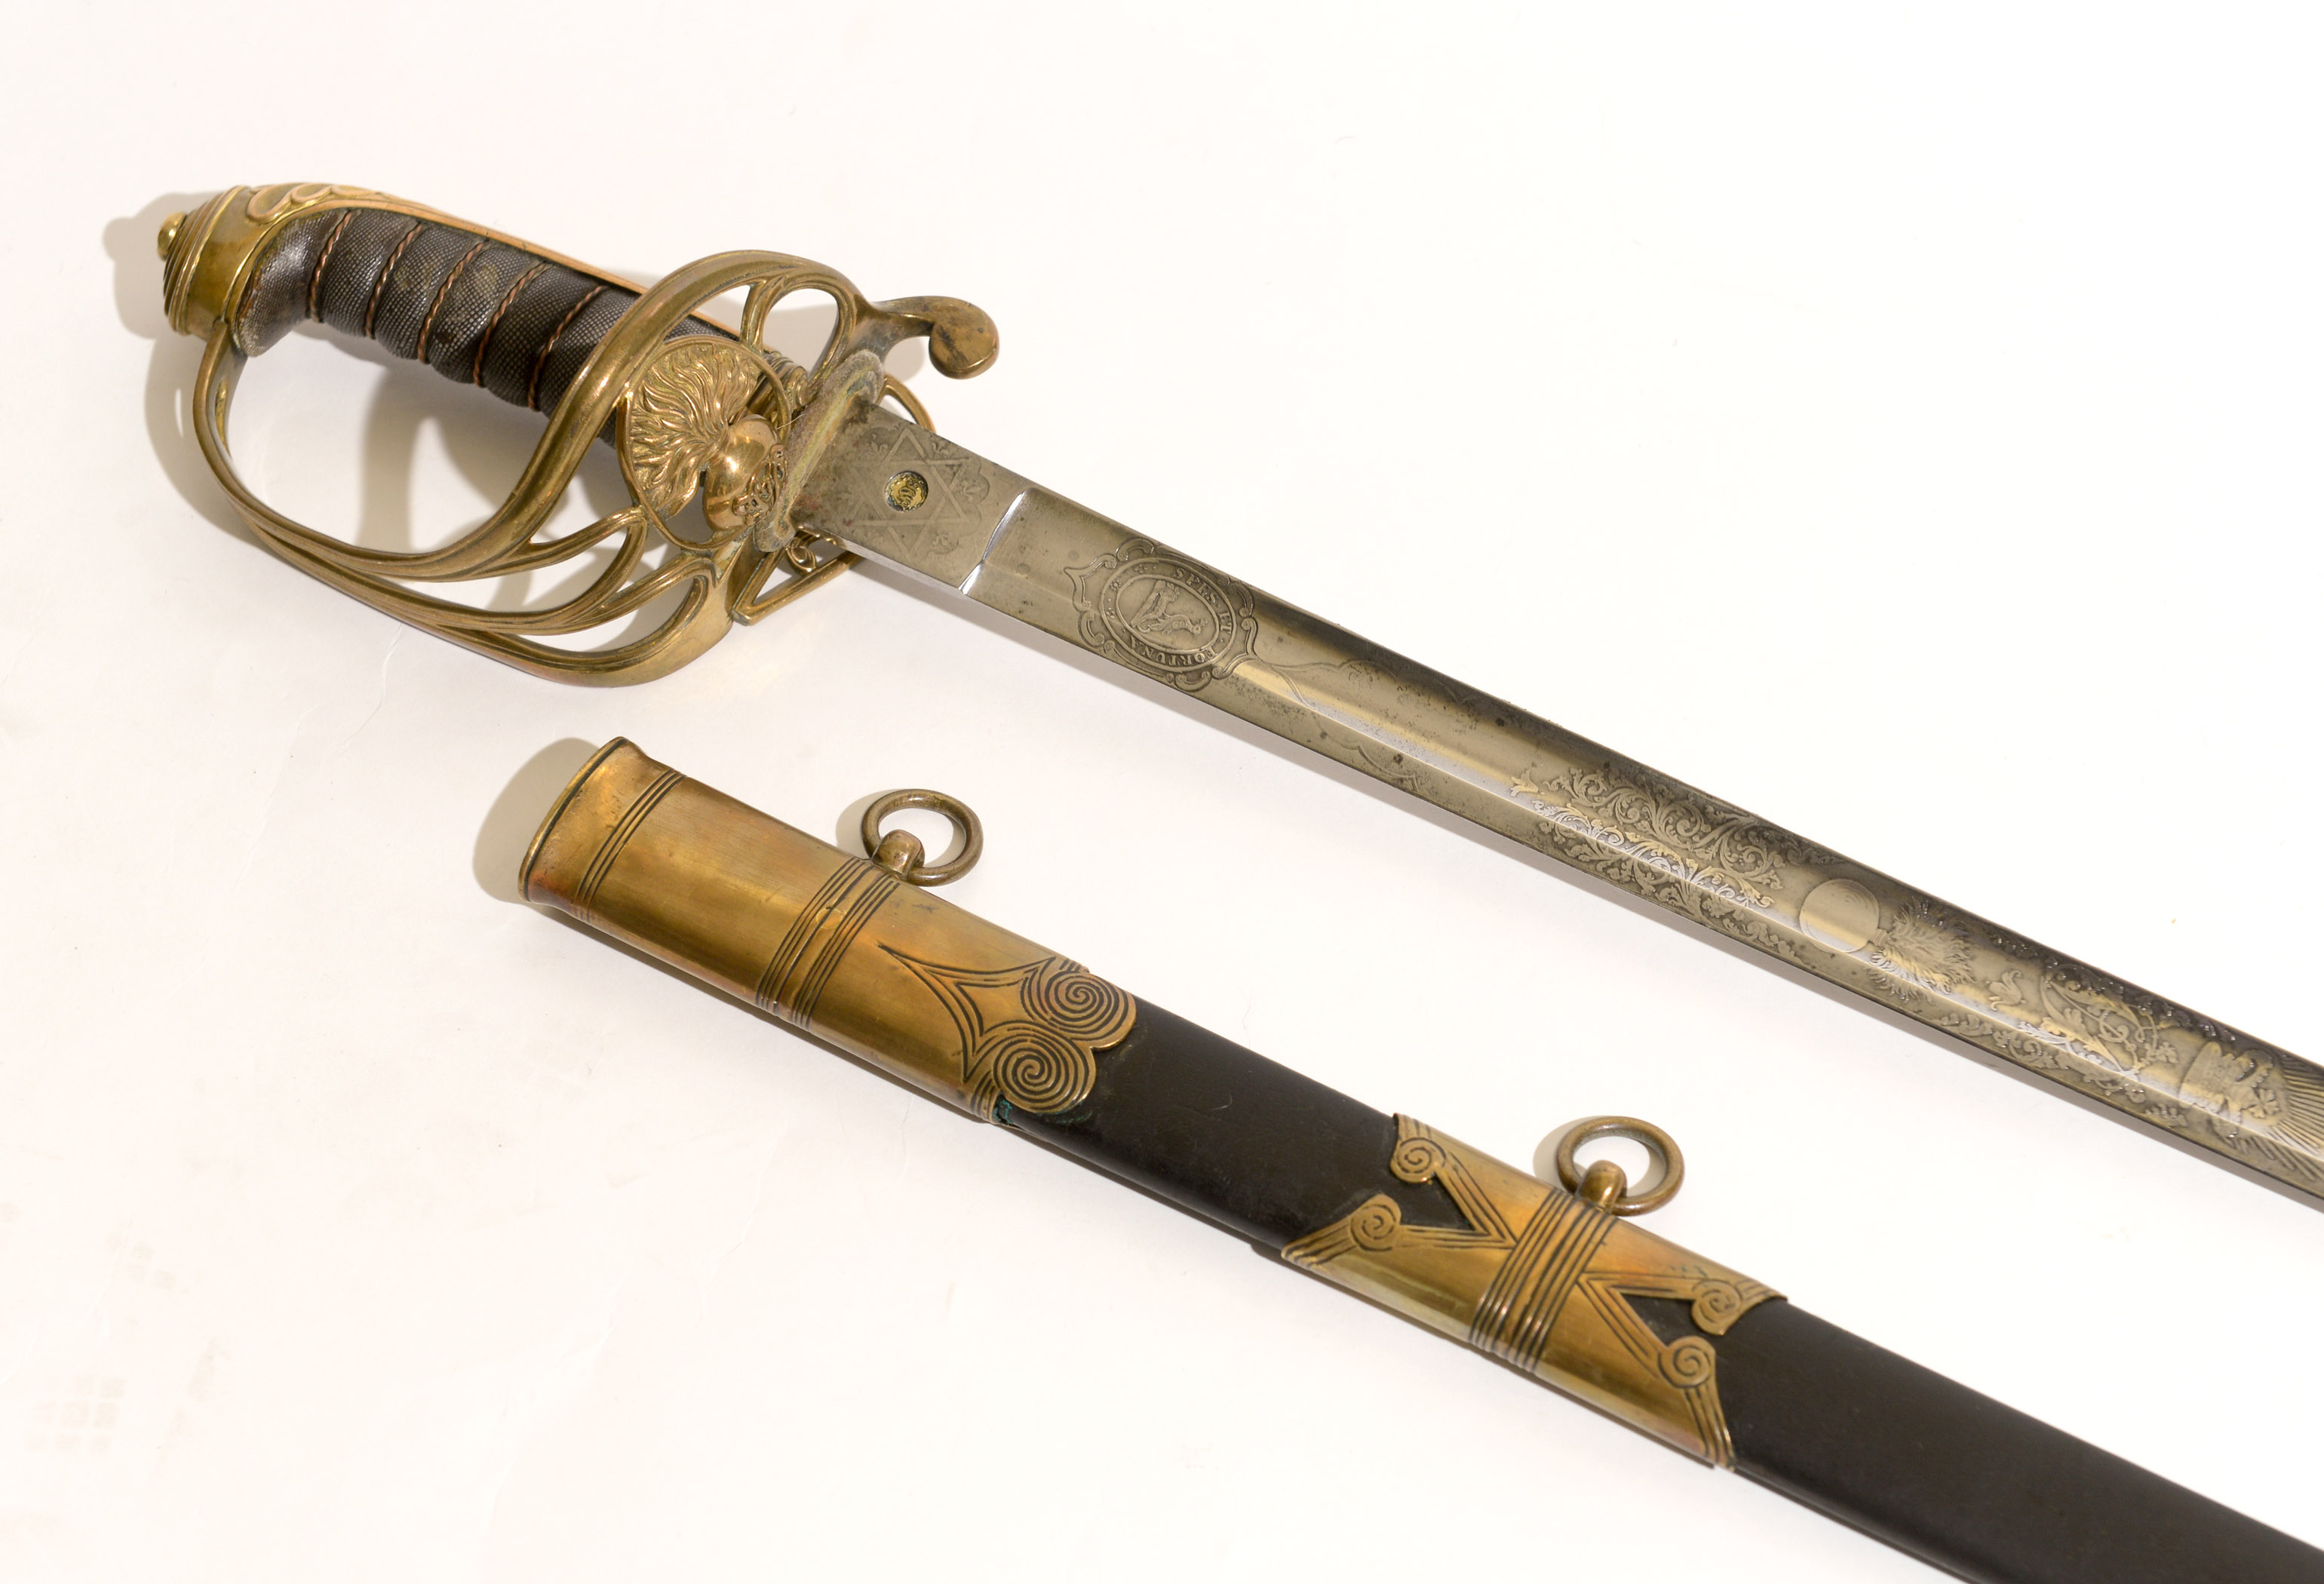 LORD CHELMSFORD's SWORD. A Grenadier Guards sword by Henry Wilkinson of Pall Mall London, un-